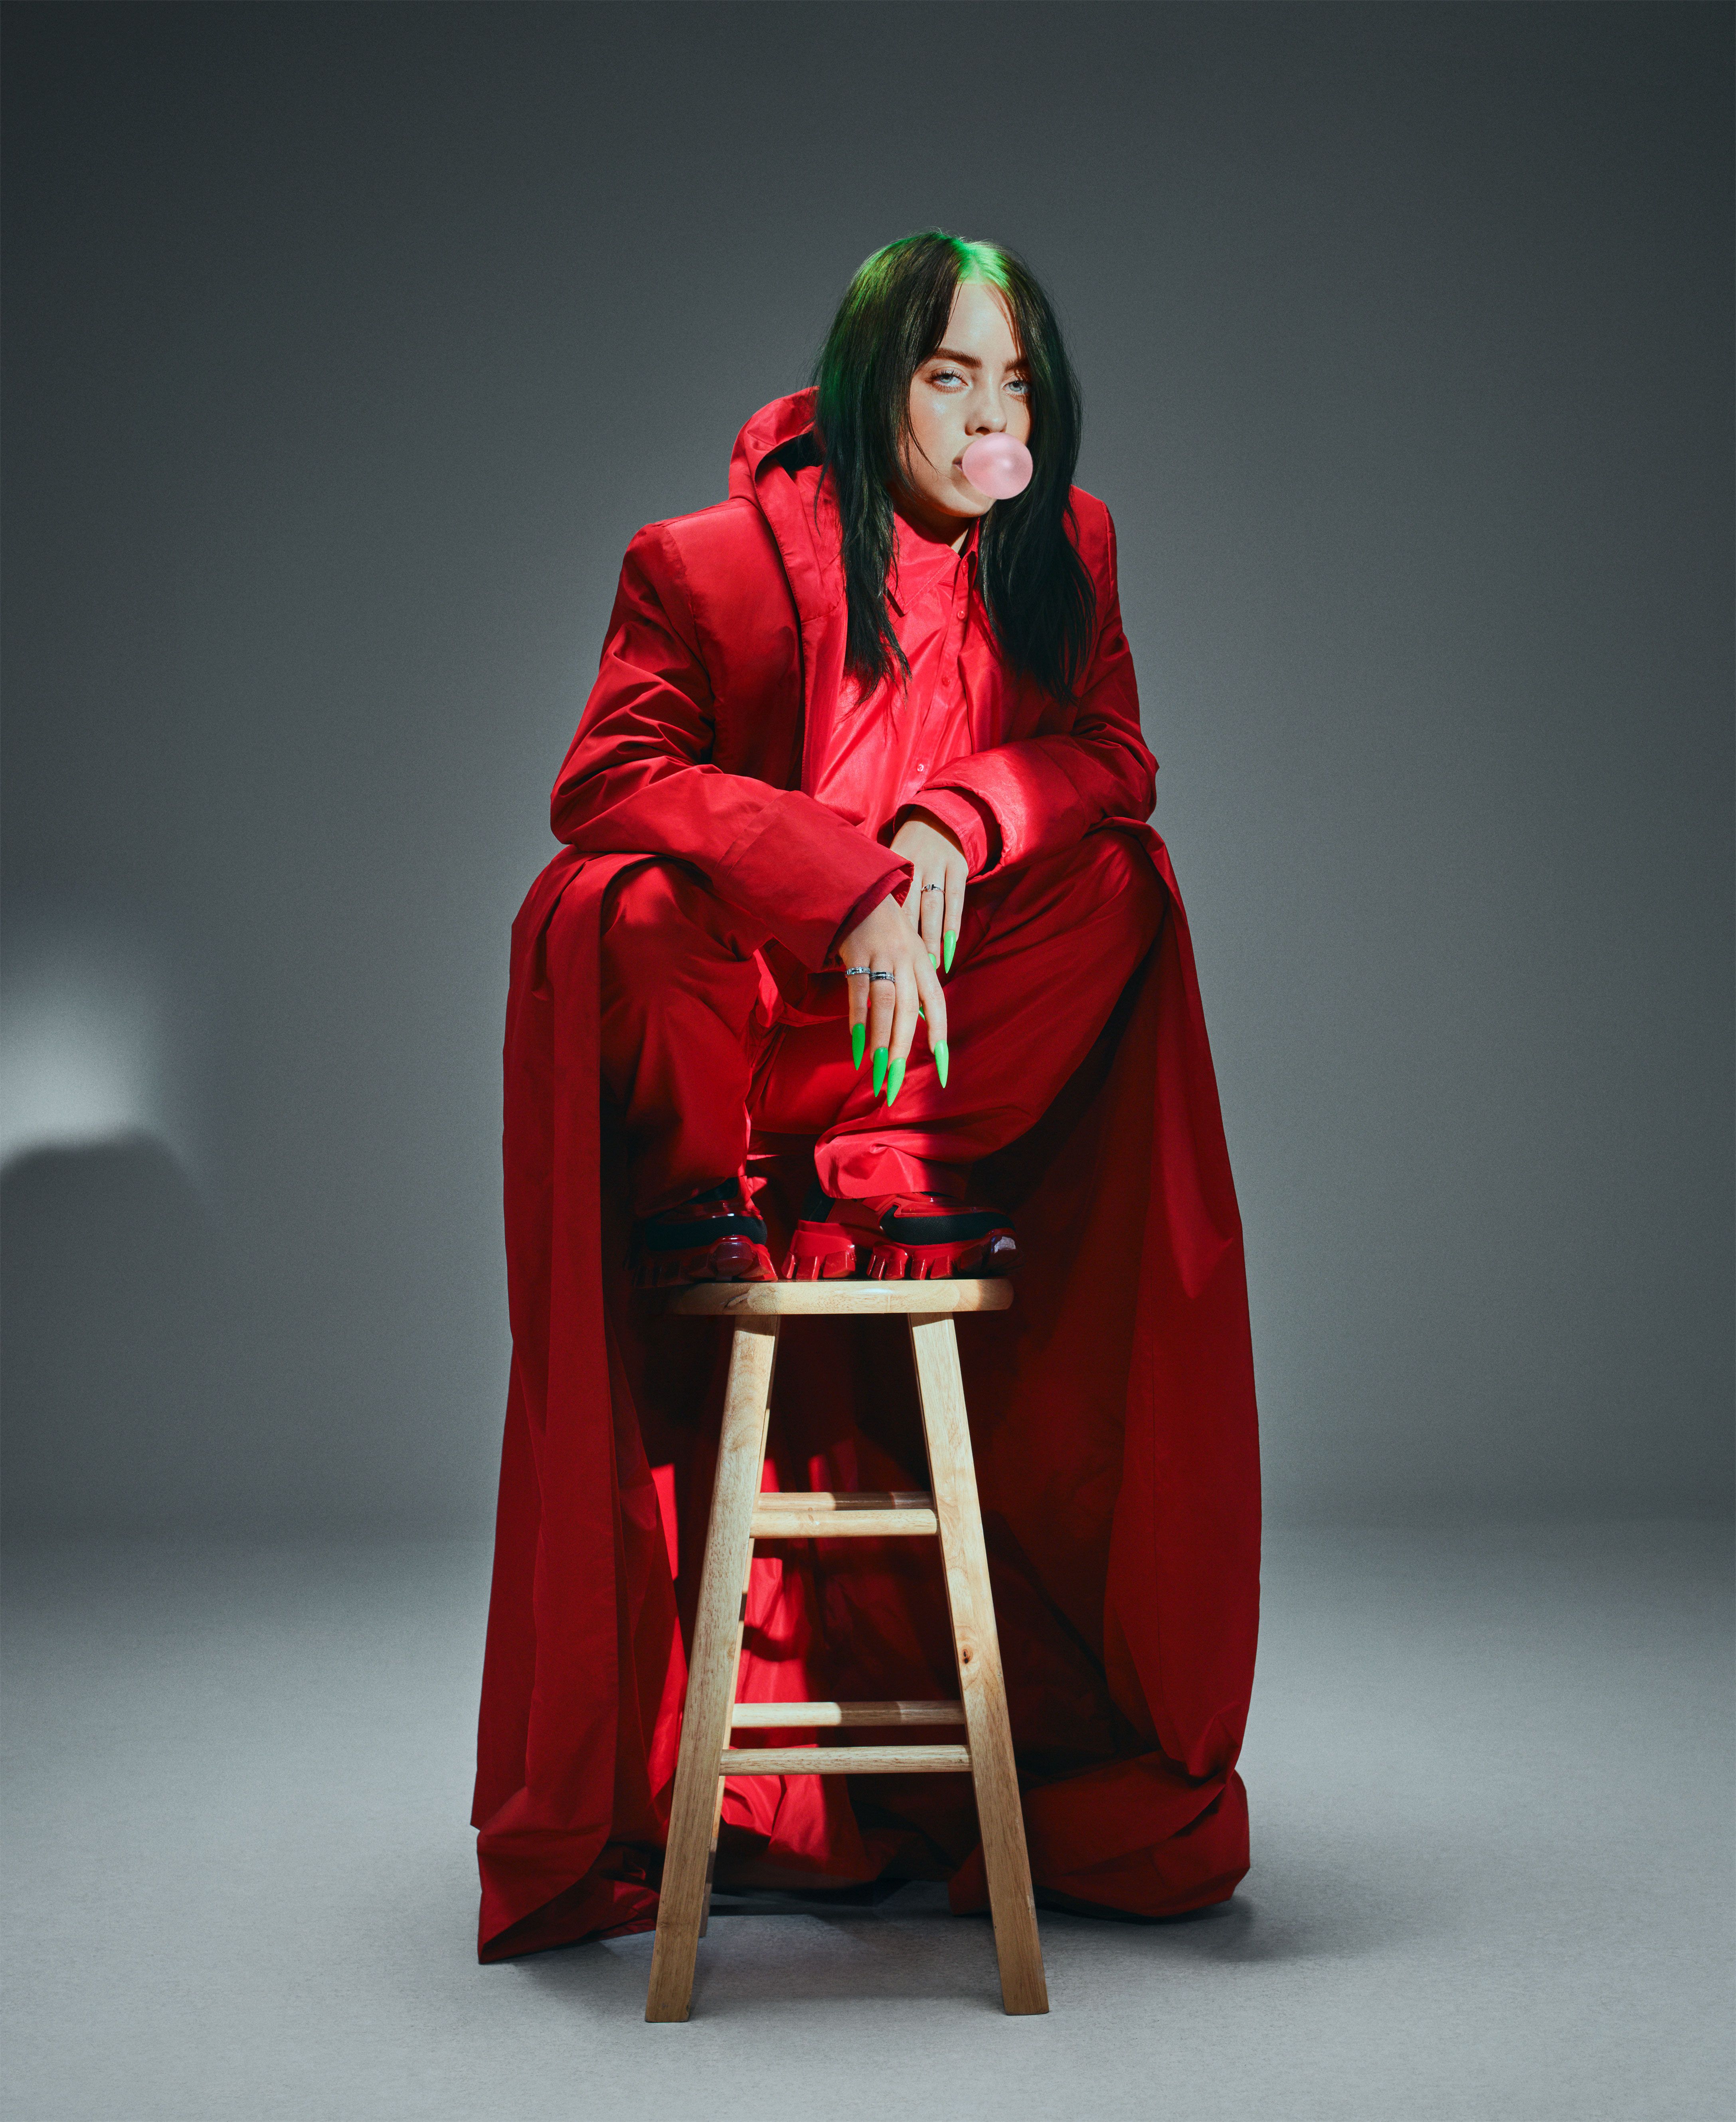 Sexy Teen Hardcore - Billie Eilish Interview on Adjusting to Fame, Her Style, and Mental Health